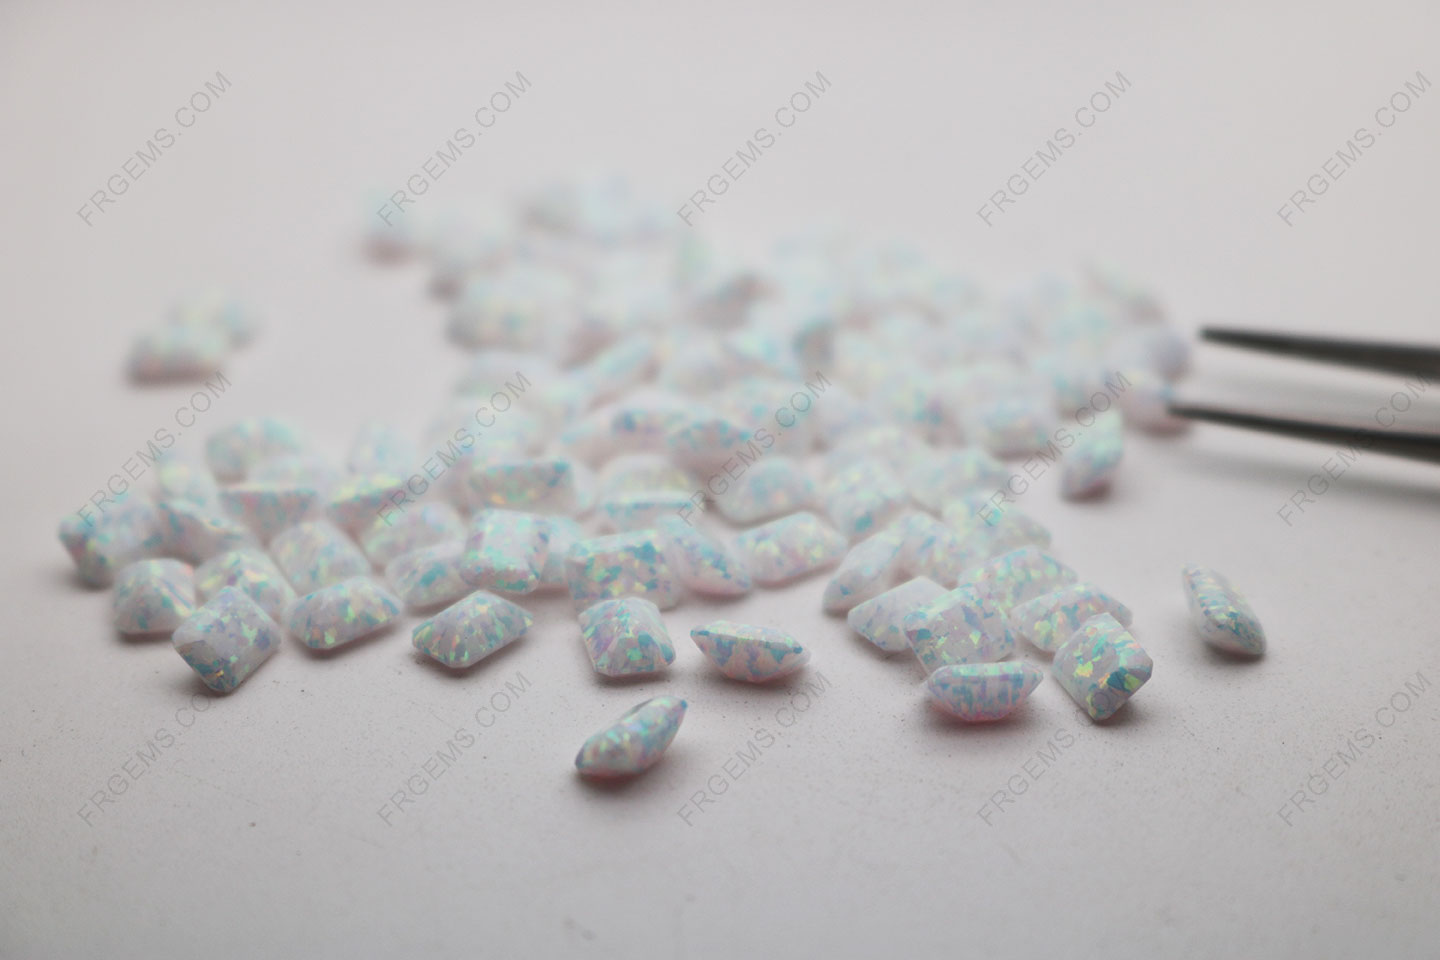 Loose Synthetic Opal White OP17 Color Octagon shape faceted emerald cut 7x5mm gemstones wholesale from china Suppliers